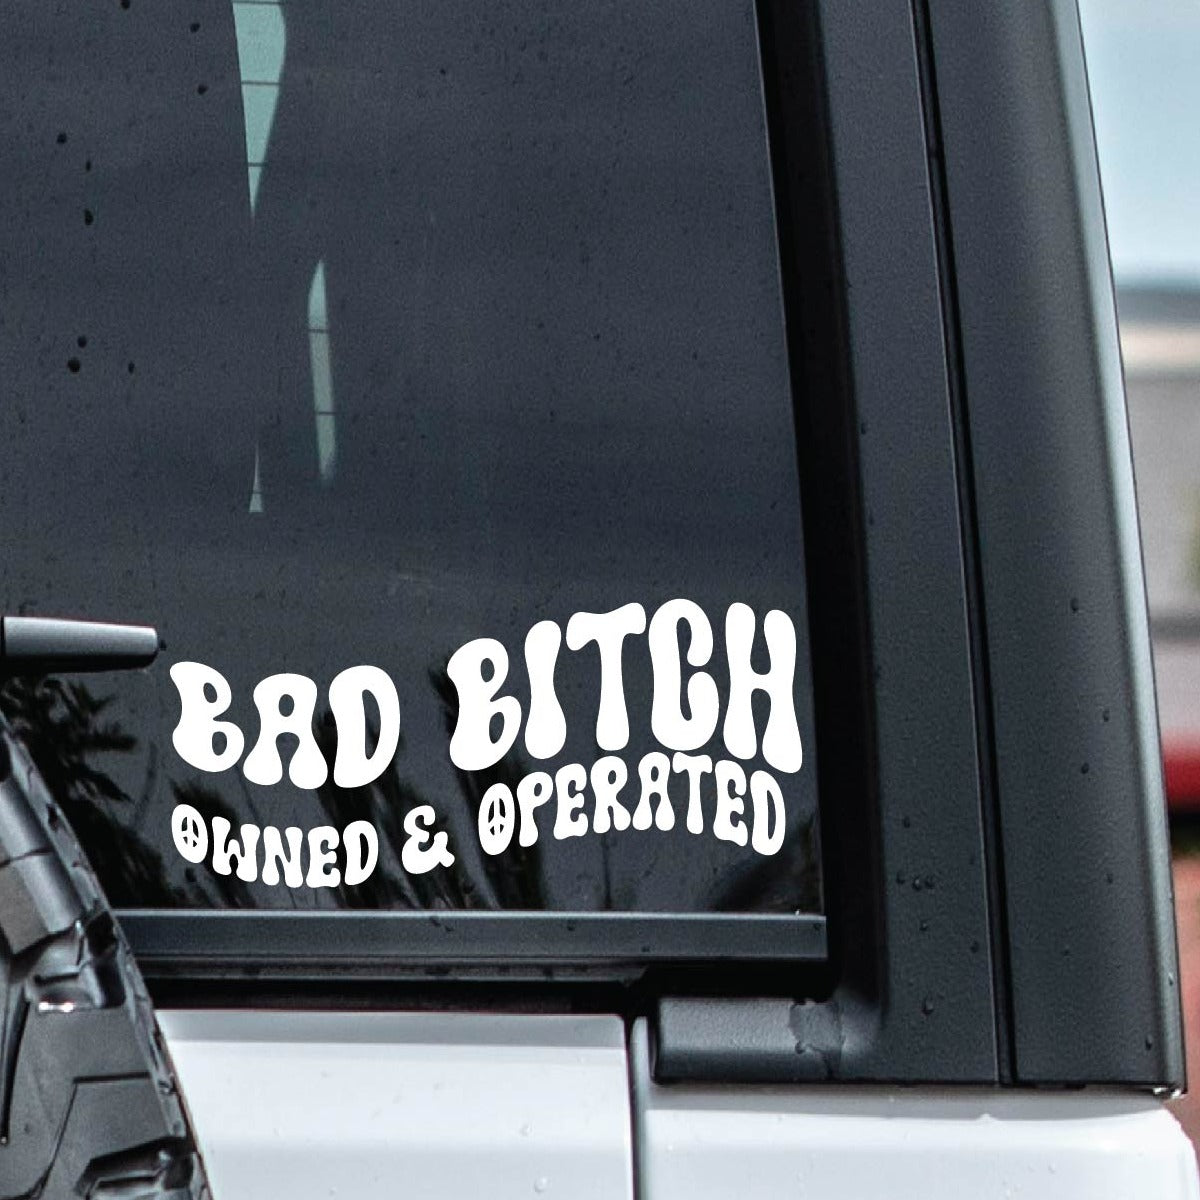 Bad Bitch Owned & Operated Vinyl Car Window Sticker.